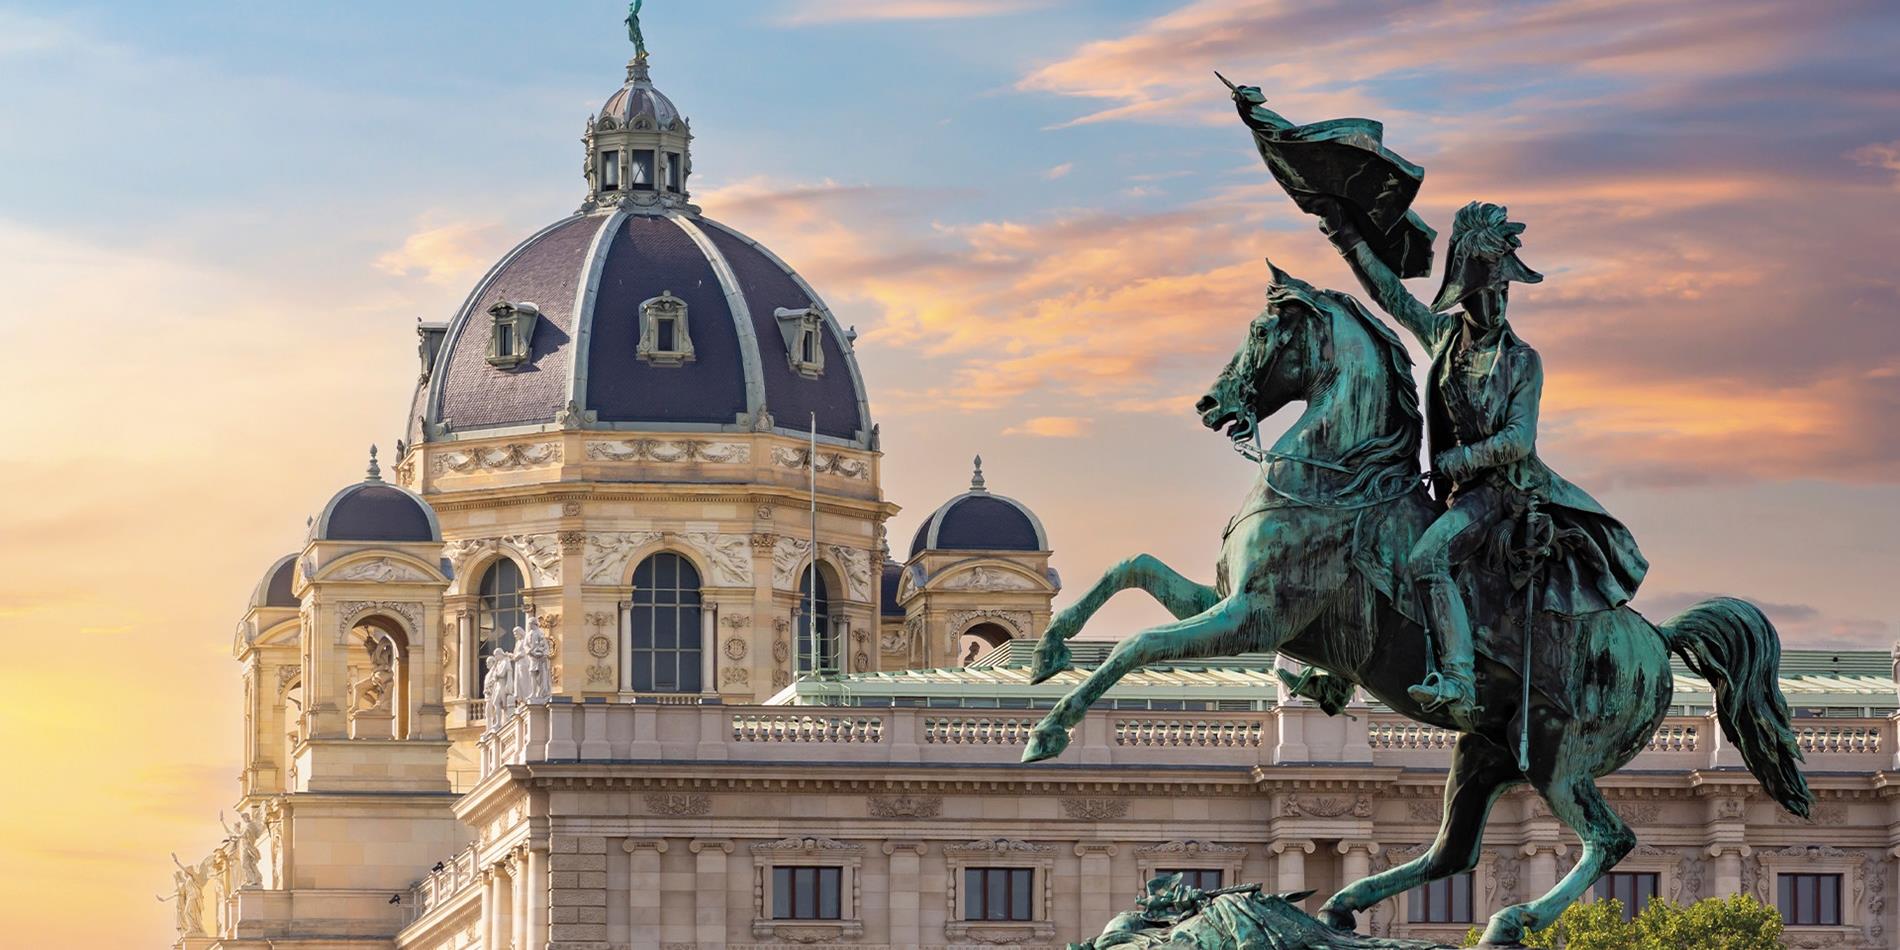 Statue of Archduke Charles Heldenplatz in front of the dome of Museum of Natural history, Vienna, Austria